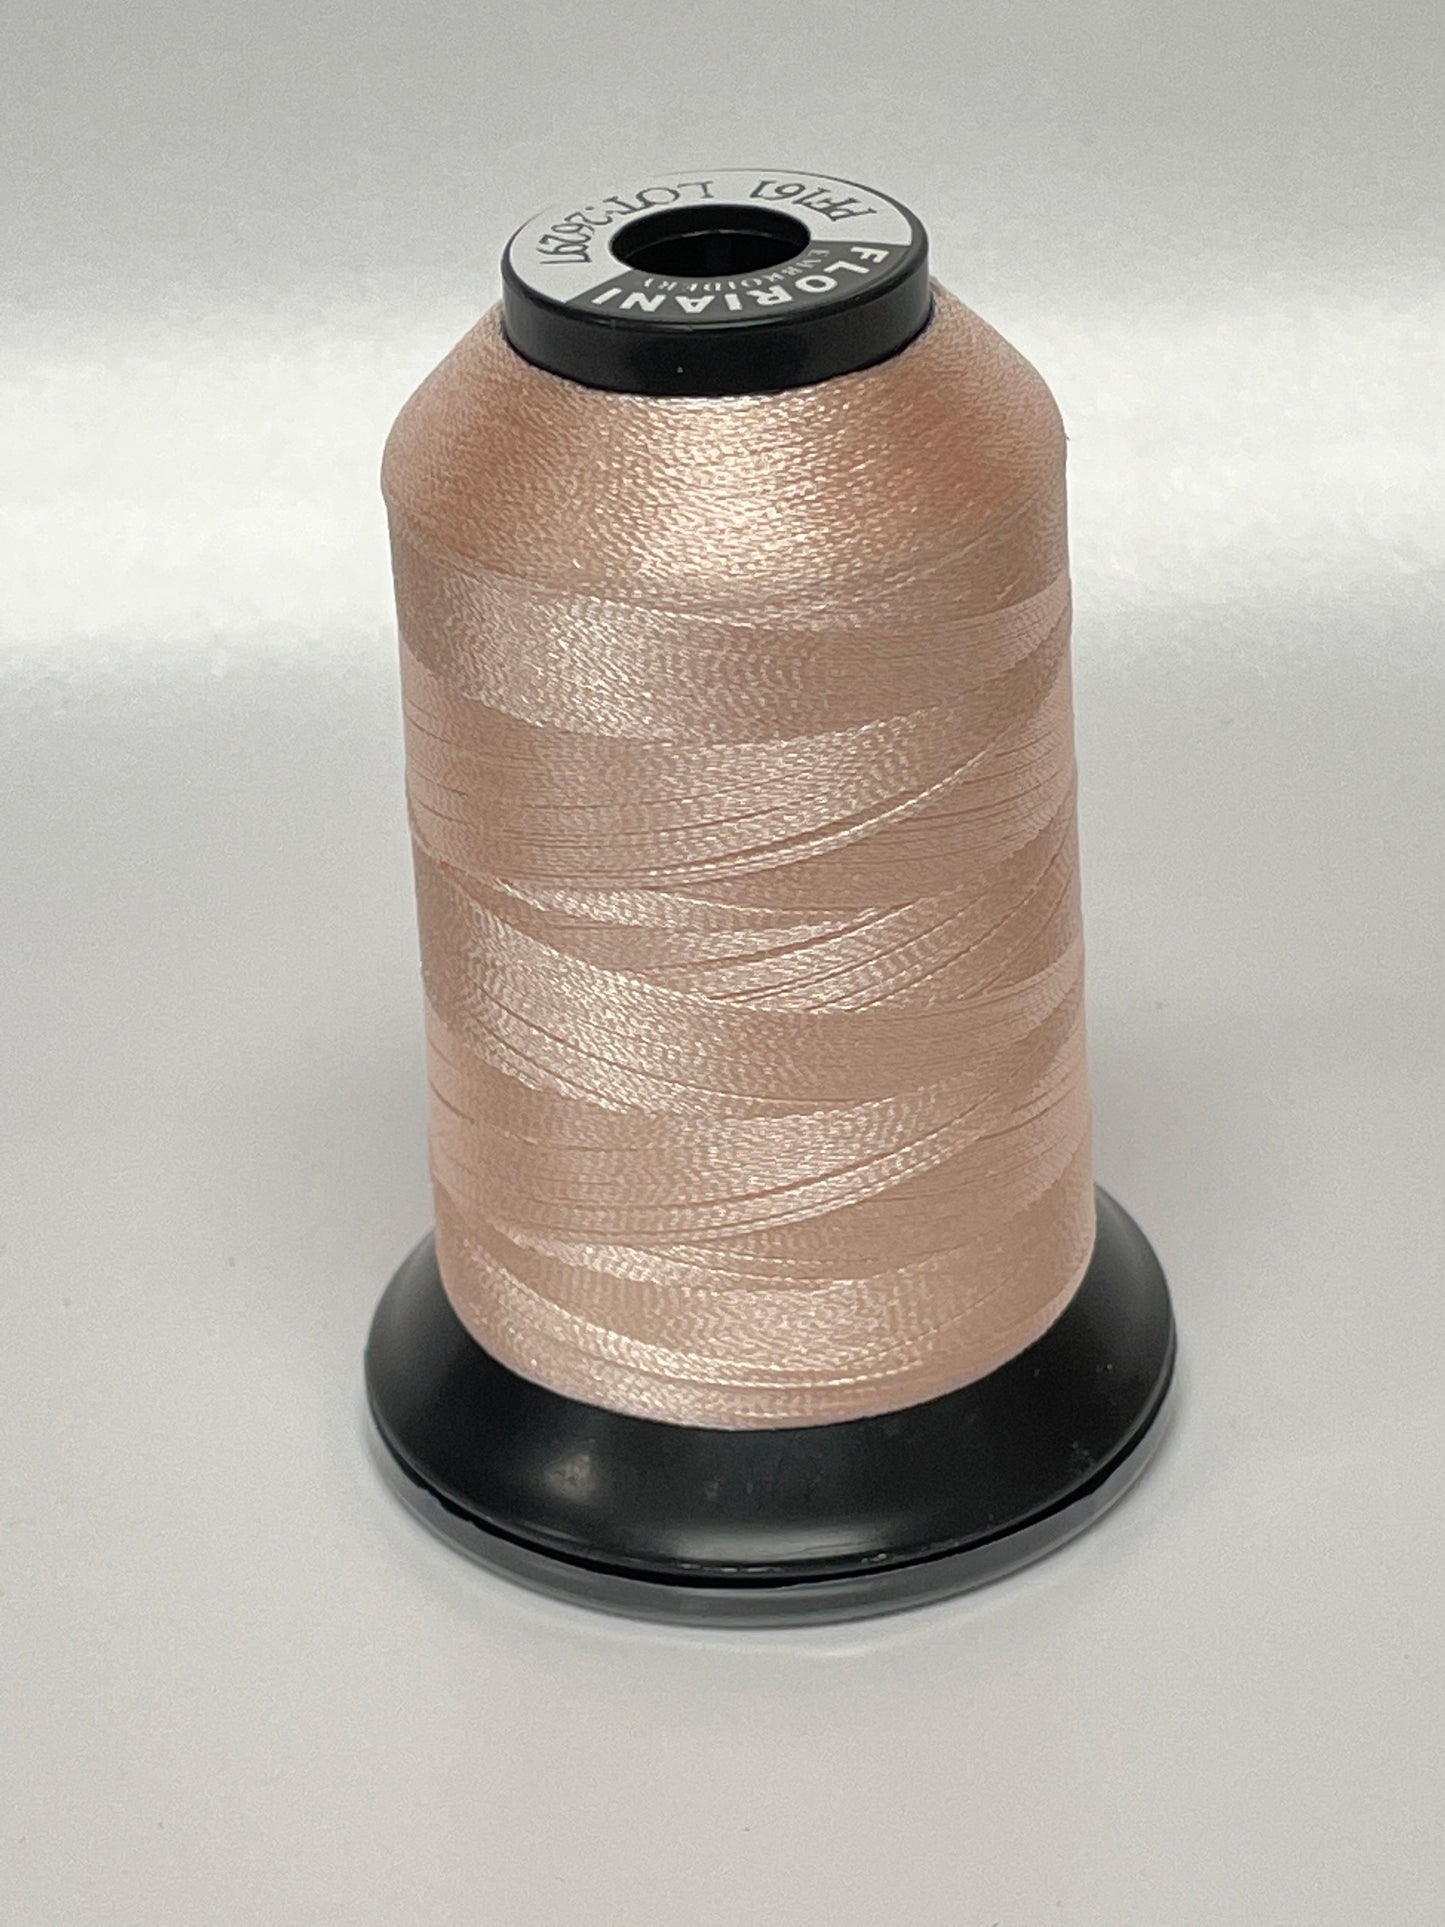 Floriani Embroidery Thread - Pinks